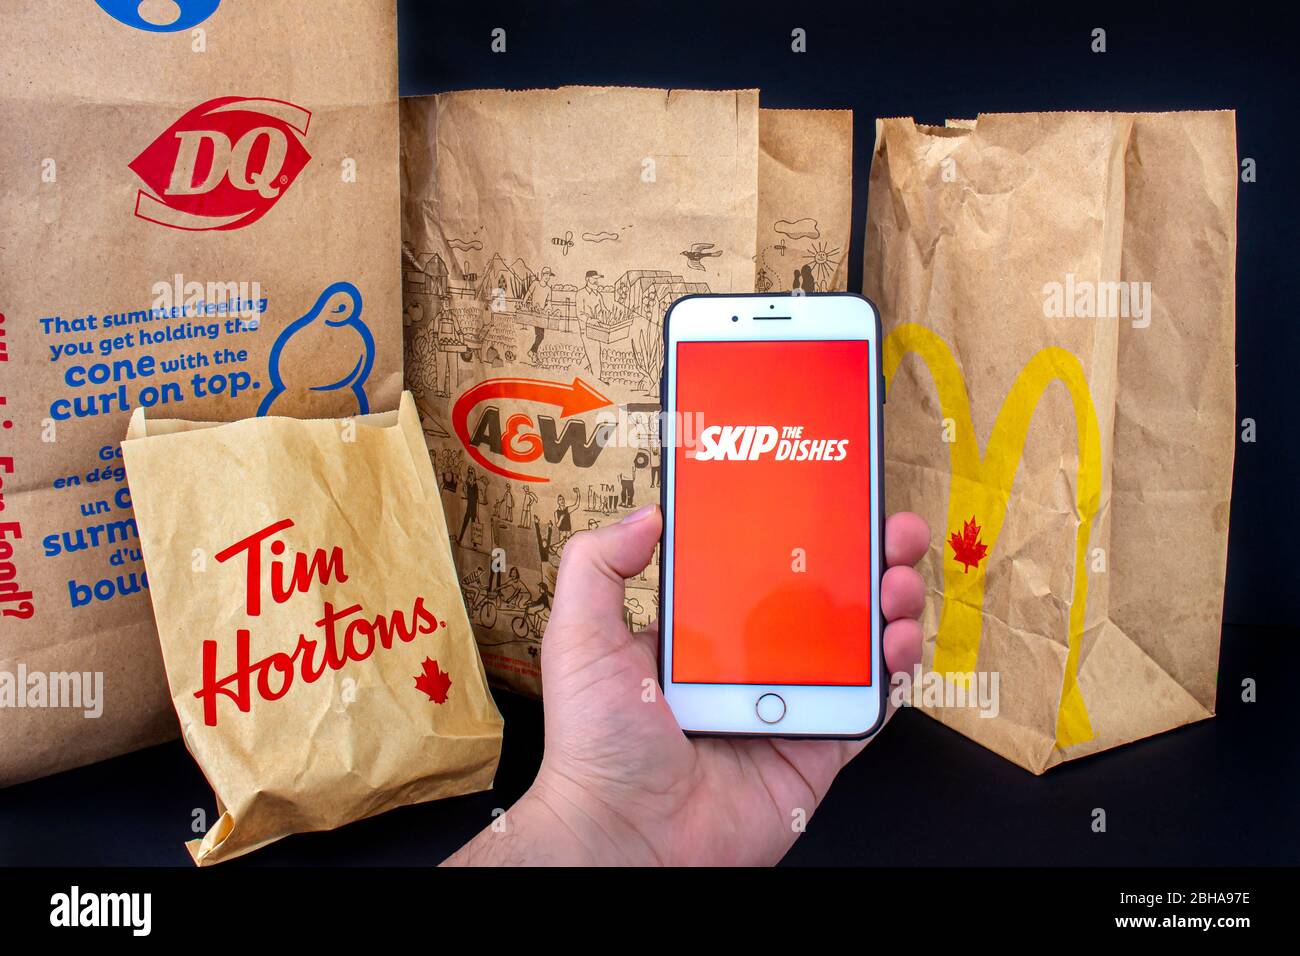 Calgary, Alberta. Canada. April 24, 2020: A person holding an iPhone Plus with the Skip the dishes application open with delivered food bags from Tim Stock Photo